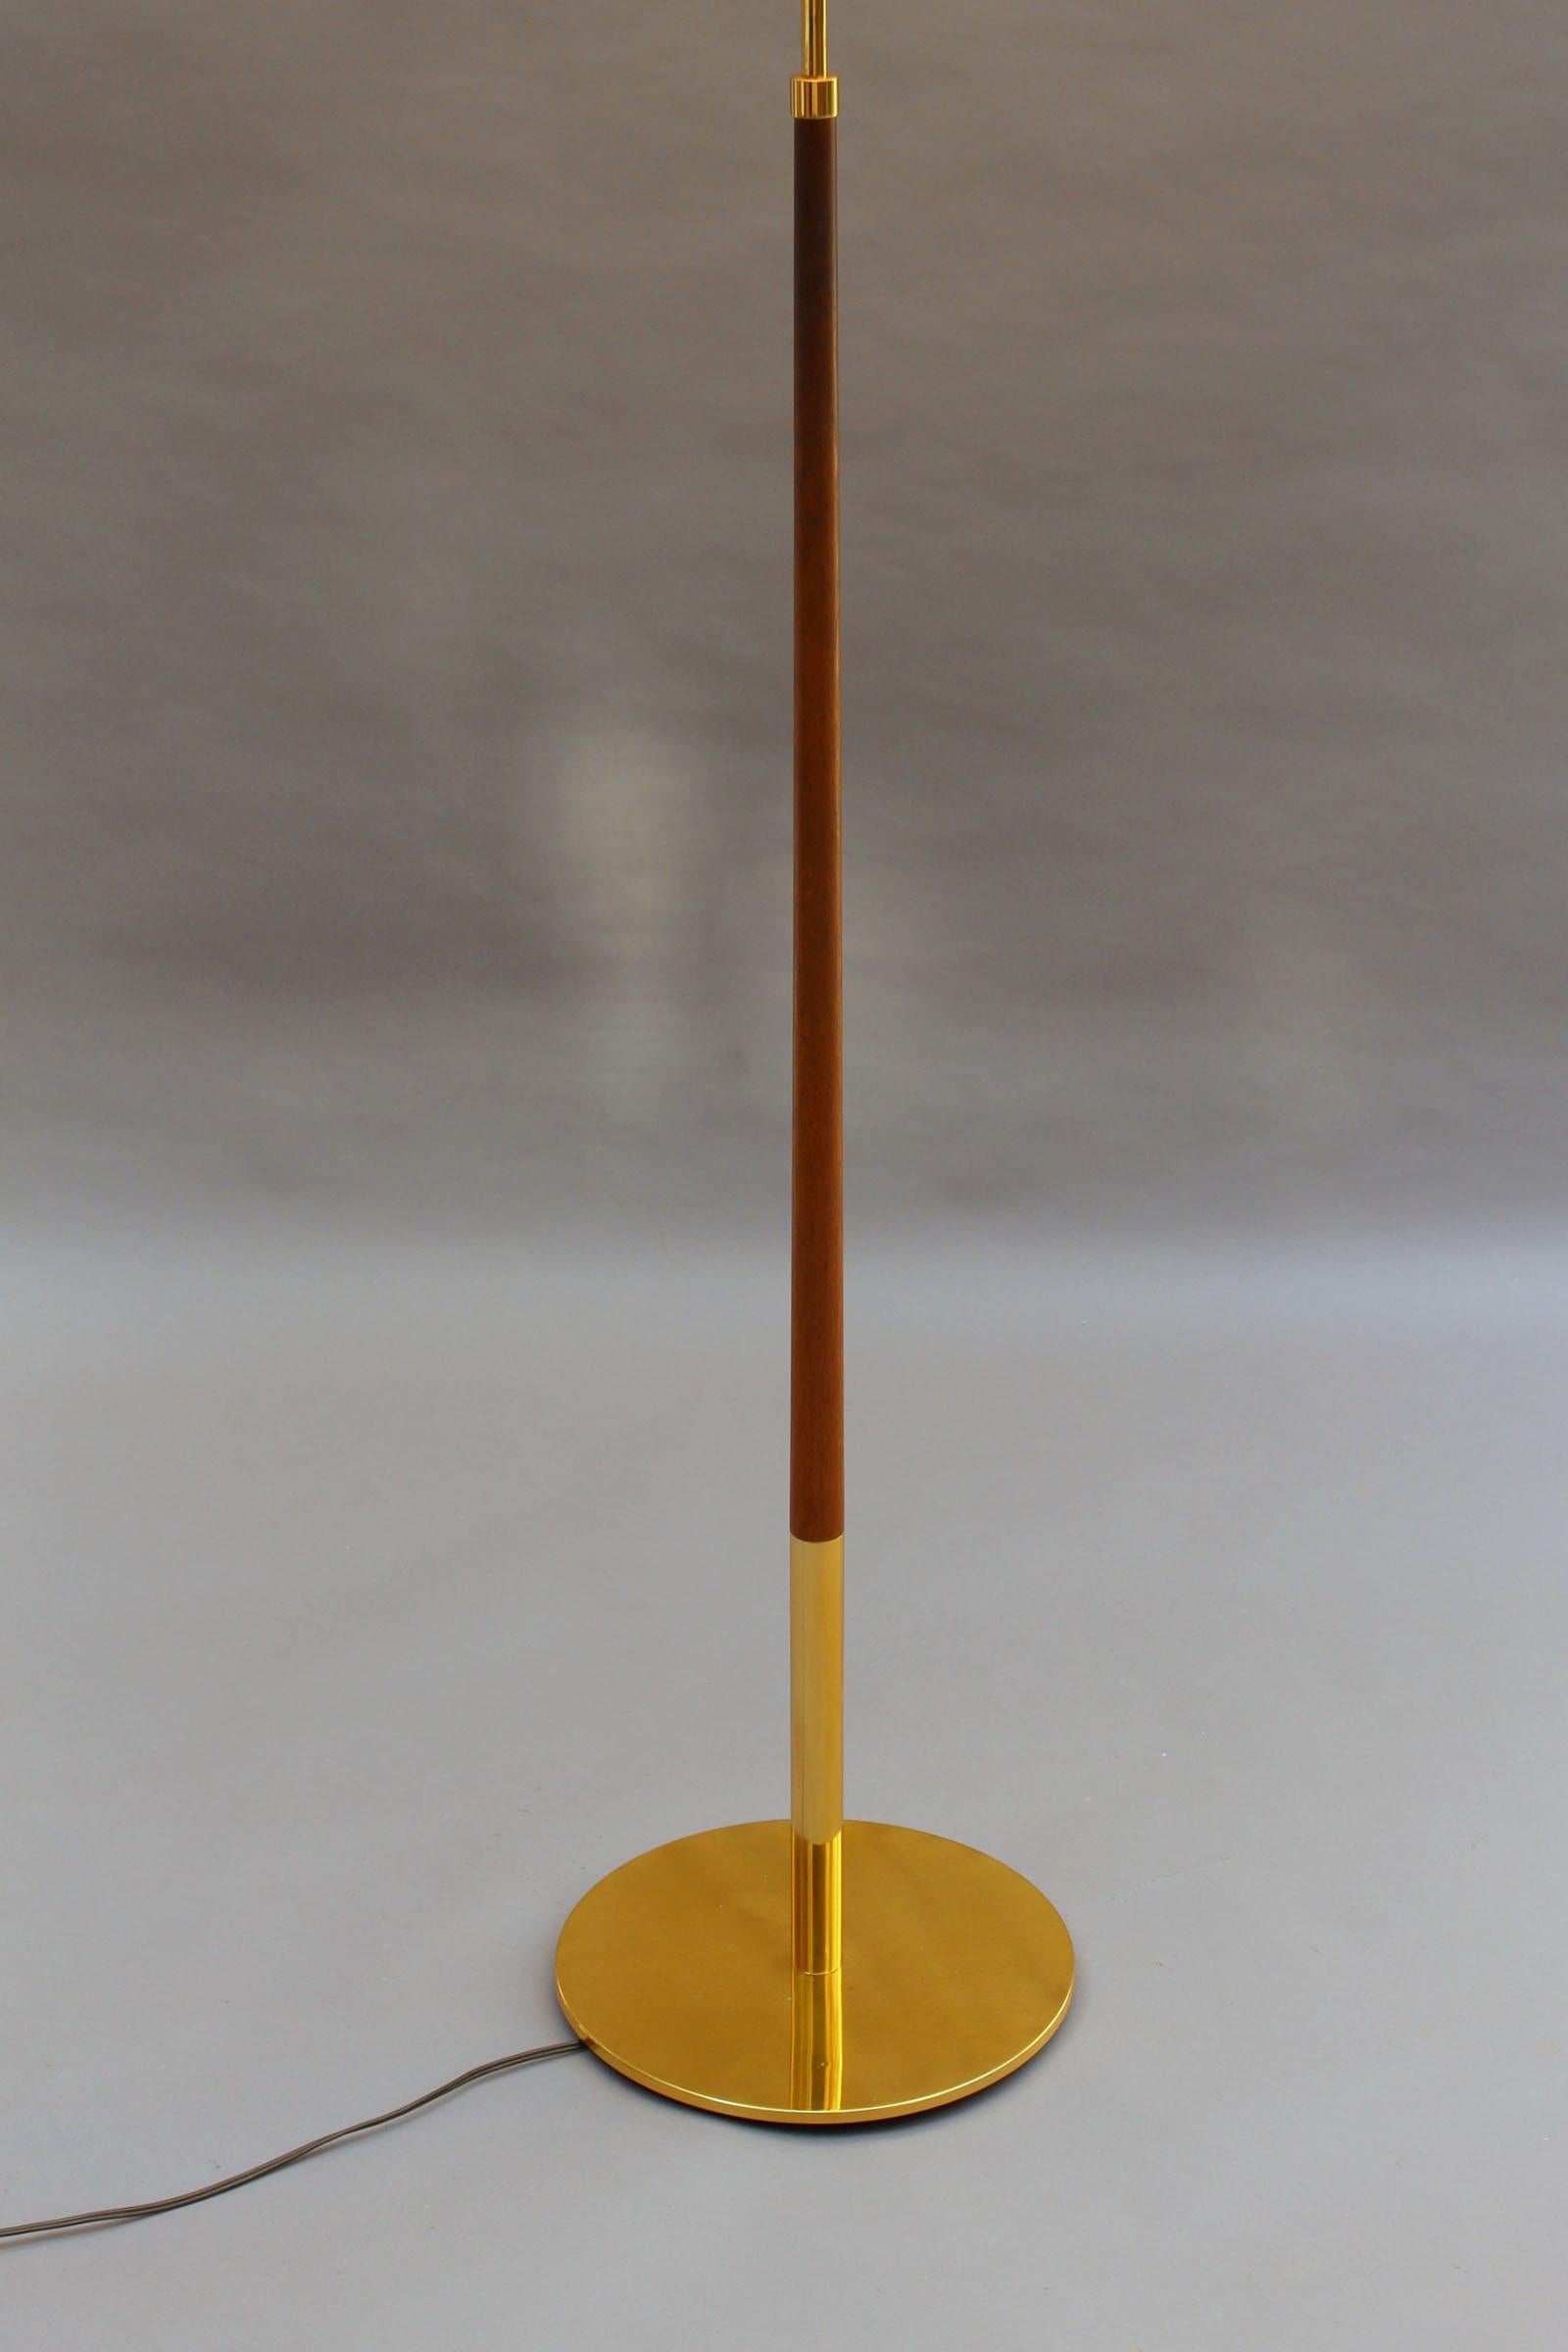 Mid-20th Century Fine 1960s Danish Floor Lamp by Th. Valentiner For Sale